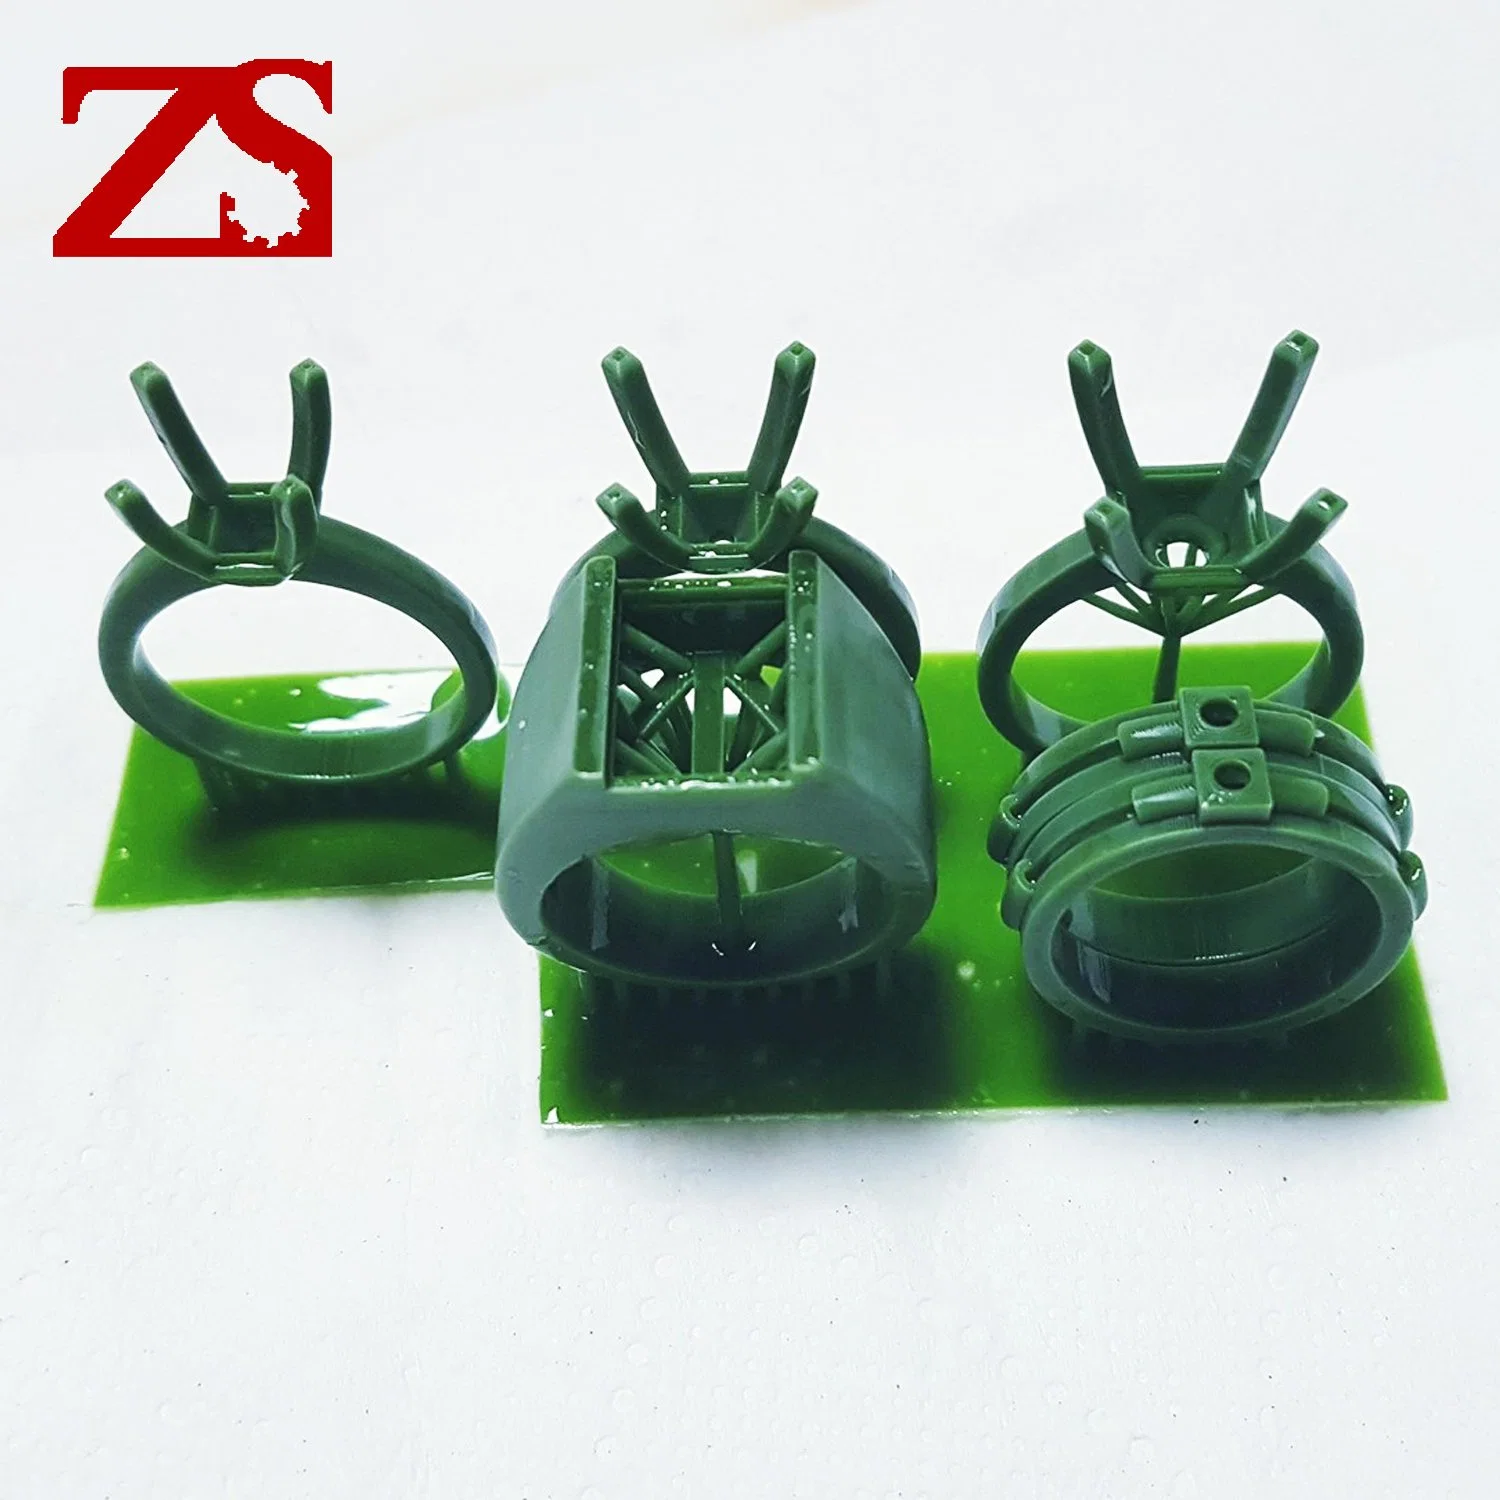 Zs 3D Printer Castable Resin Made in China for SLA, DLP